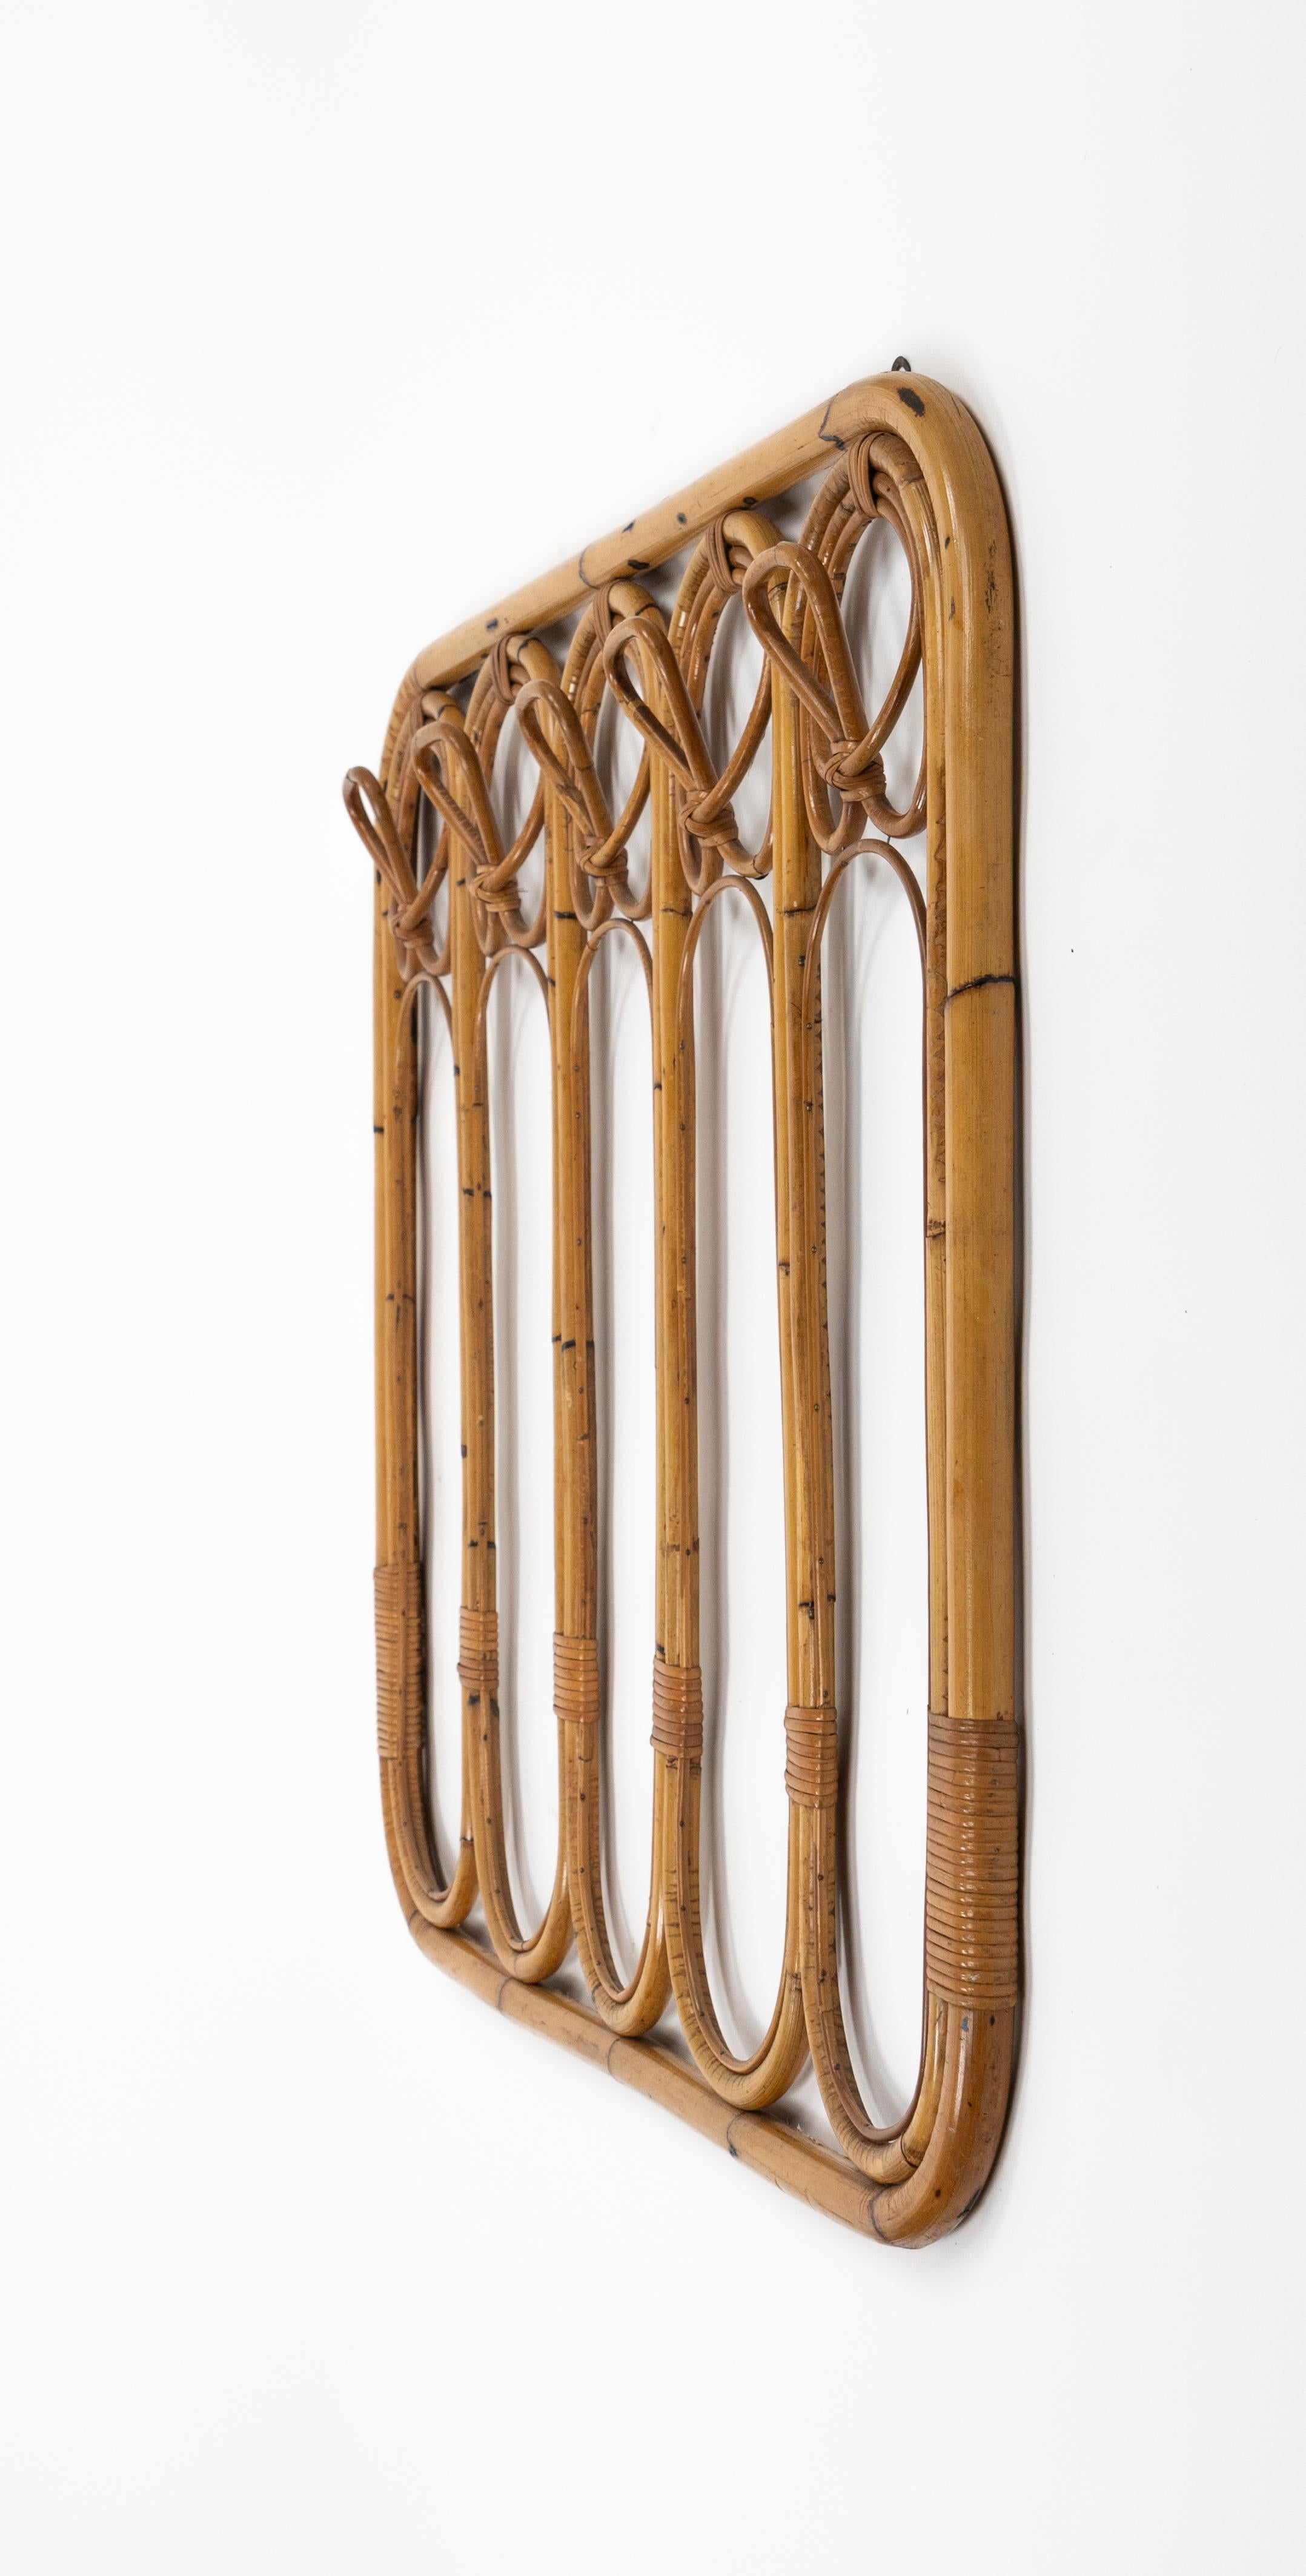 Midcentury Bamboo and Rattan Coat Rack Stand, Italy 1960s For Sale 6